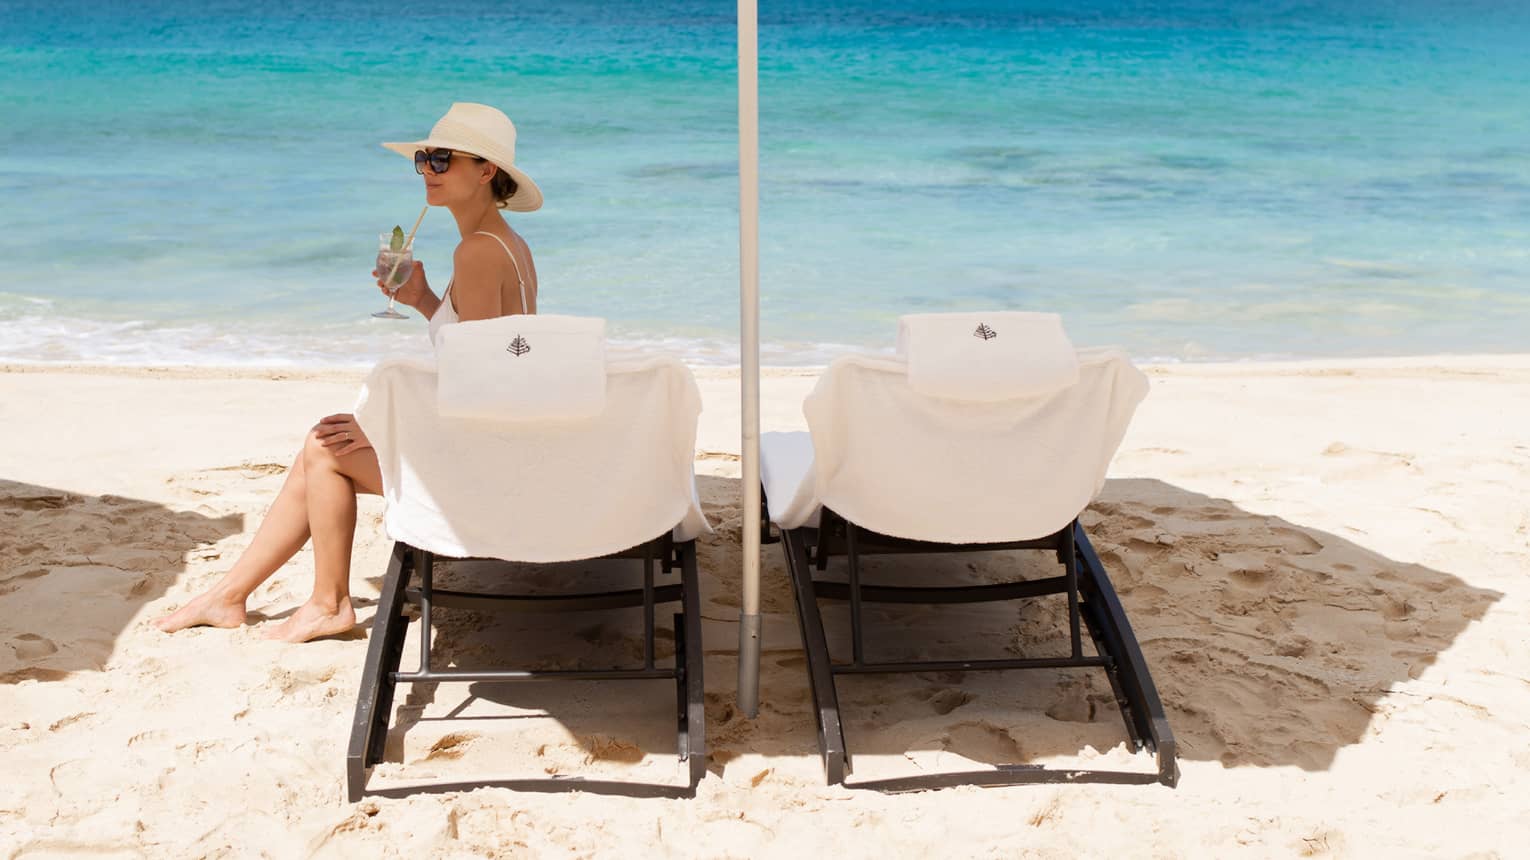 Two white beach lounge chairs a set up beneath a white umbrella on the sand near turquoise waters as a woman wearing a white swimsuit and sunhat sits on one of the chairs